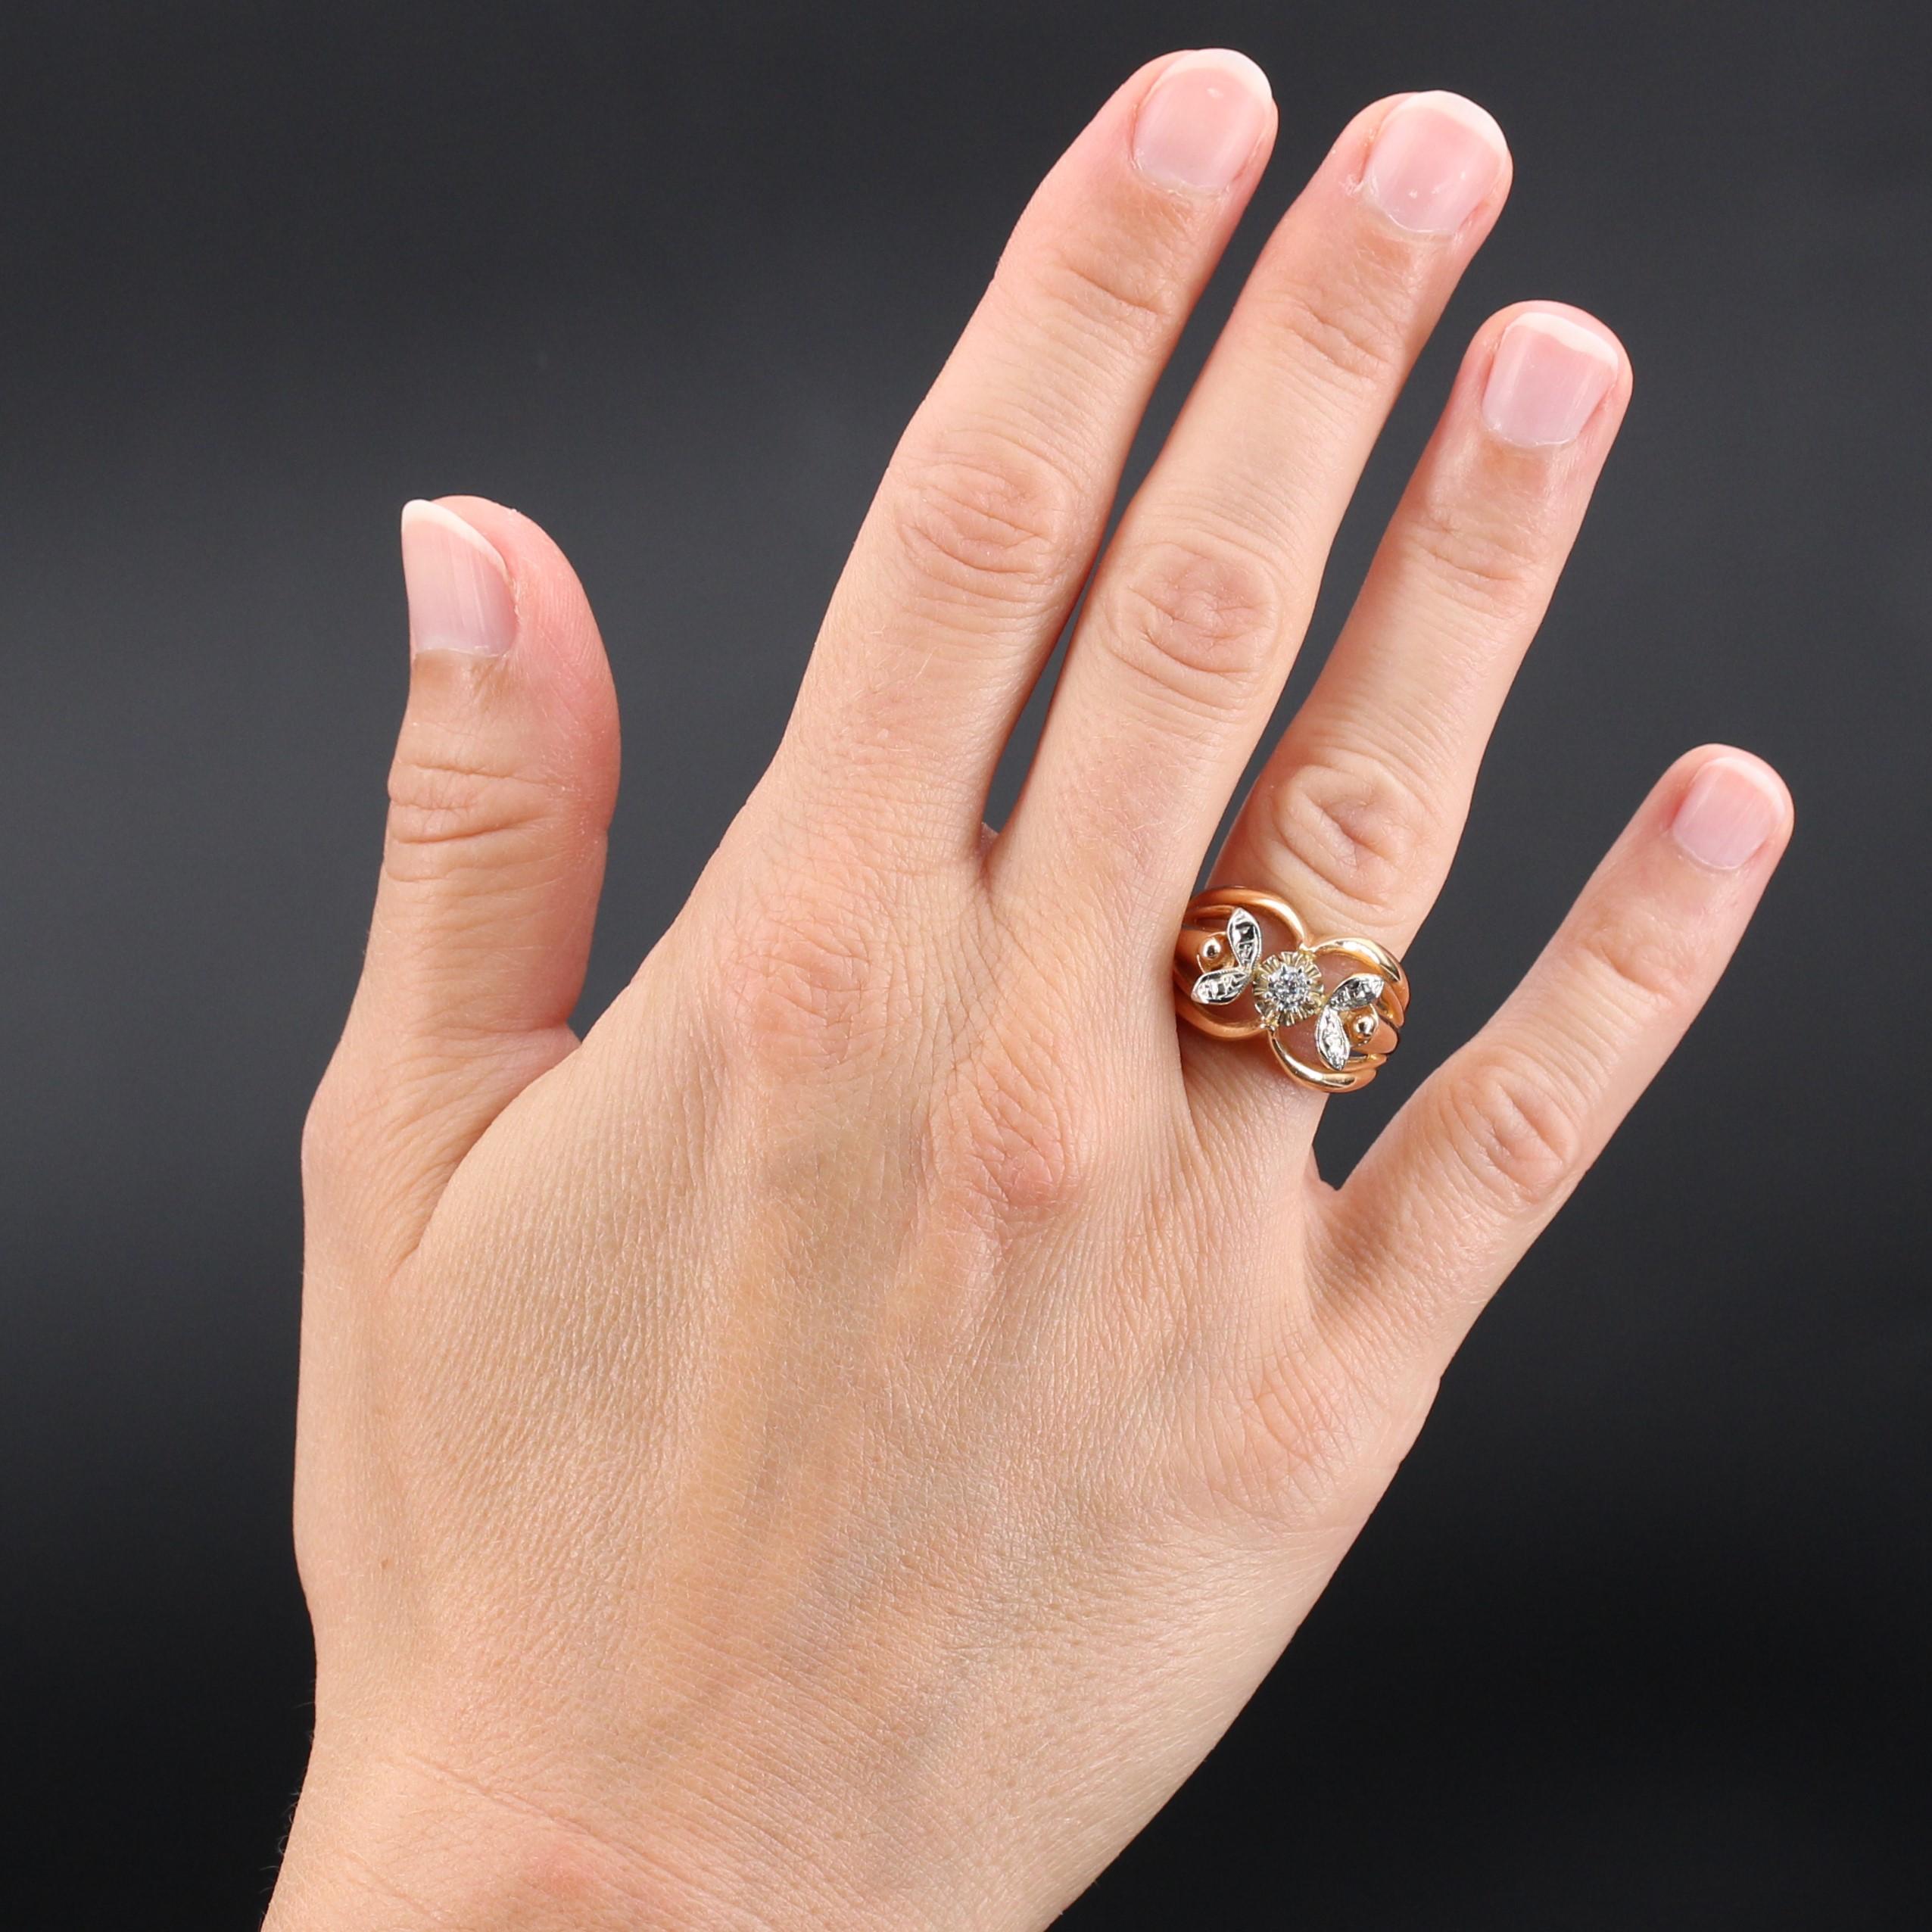 Ring in 18 karat rose and white golds, eagle head hallmark.
It is set on its top with 8 claws of a brilliant-cut diamond with 2 small leaves set with 2 x 2 rose- cut diamonds. The ring is perforated with gold threads.
Total weight of the jewel :